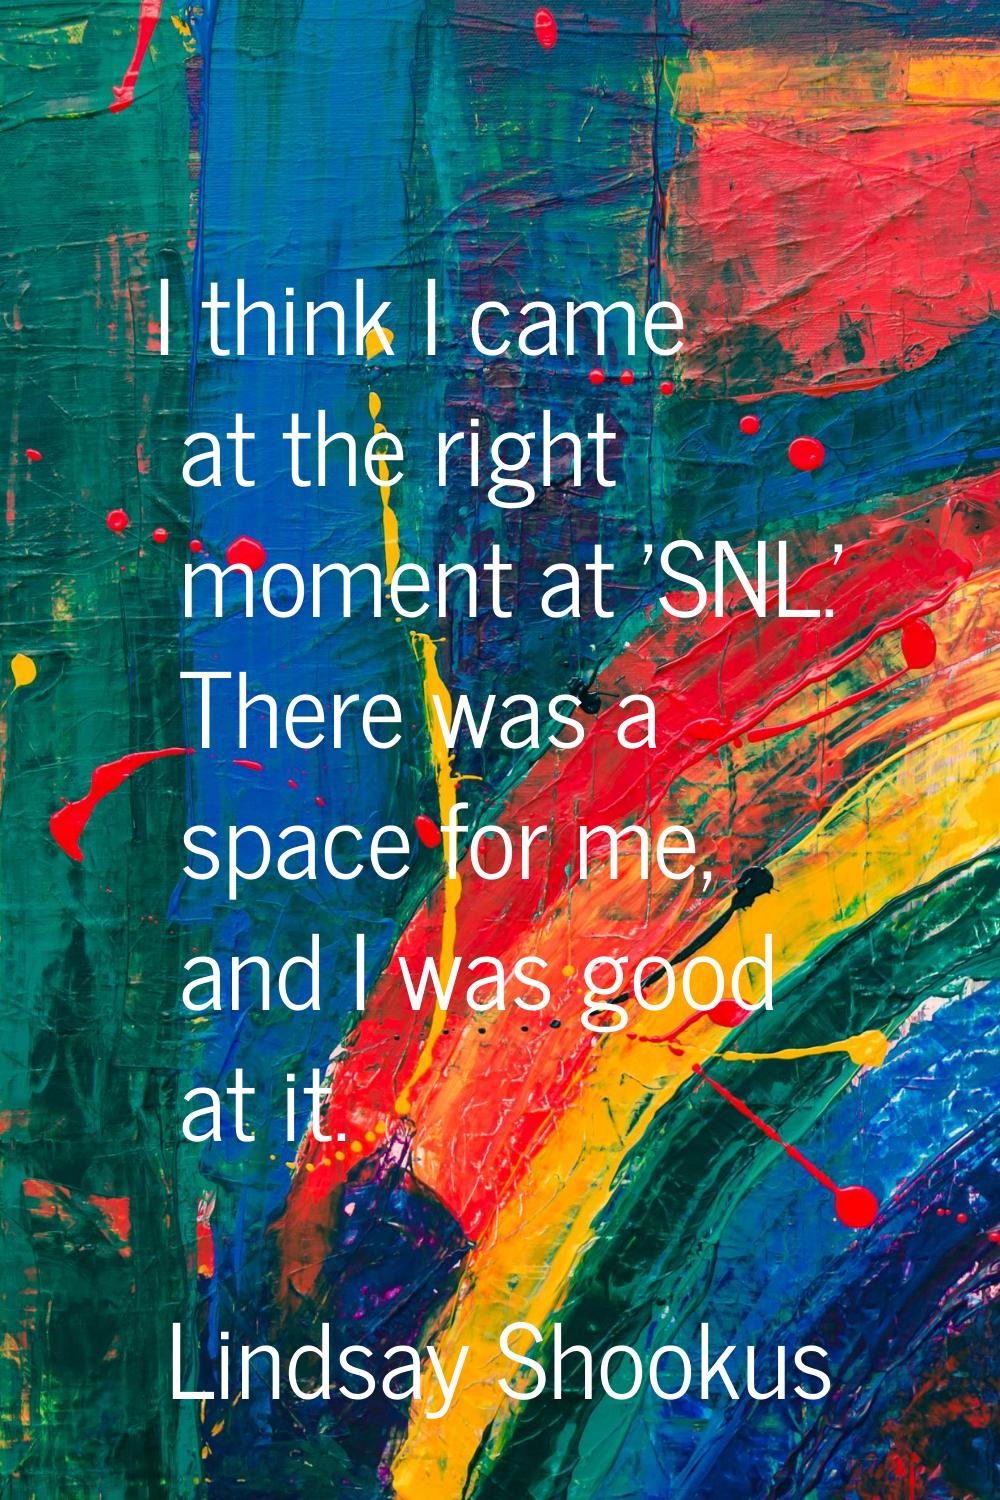 I think I came at the right moment at 'SNL.' There was a space for me, and I was good at it.